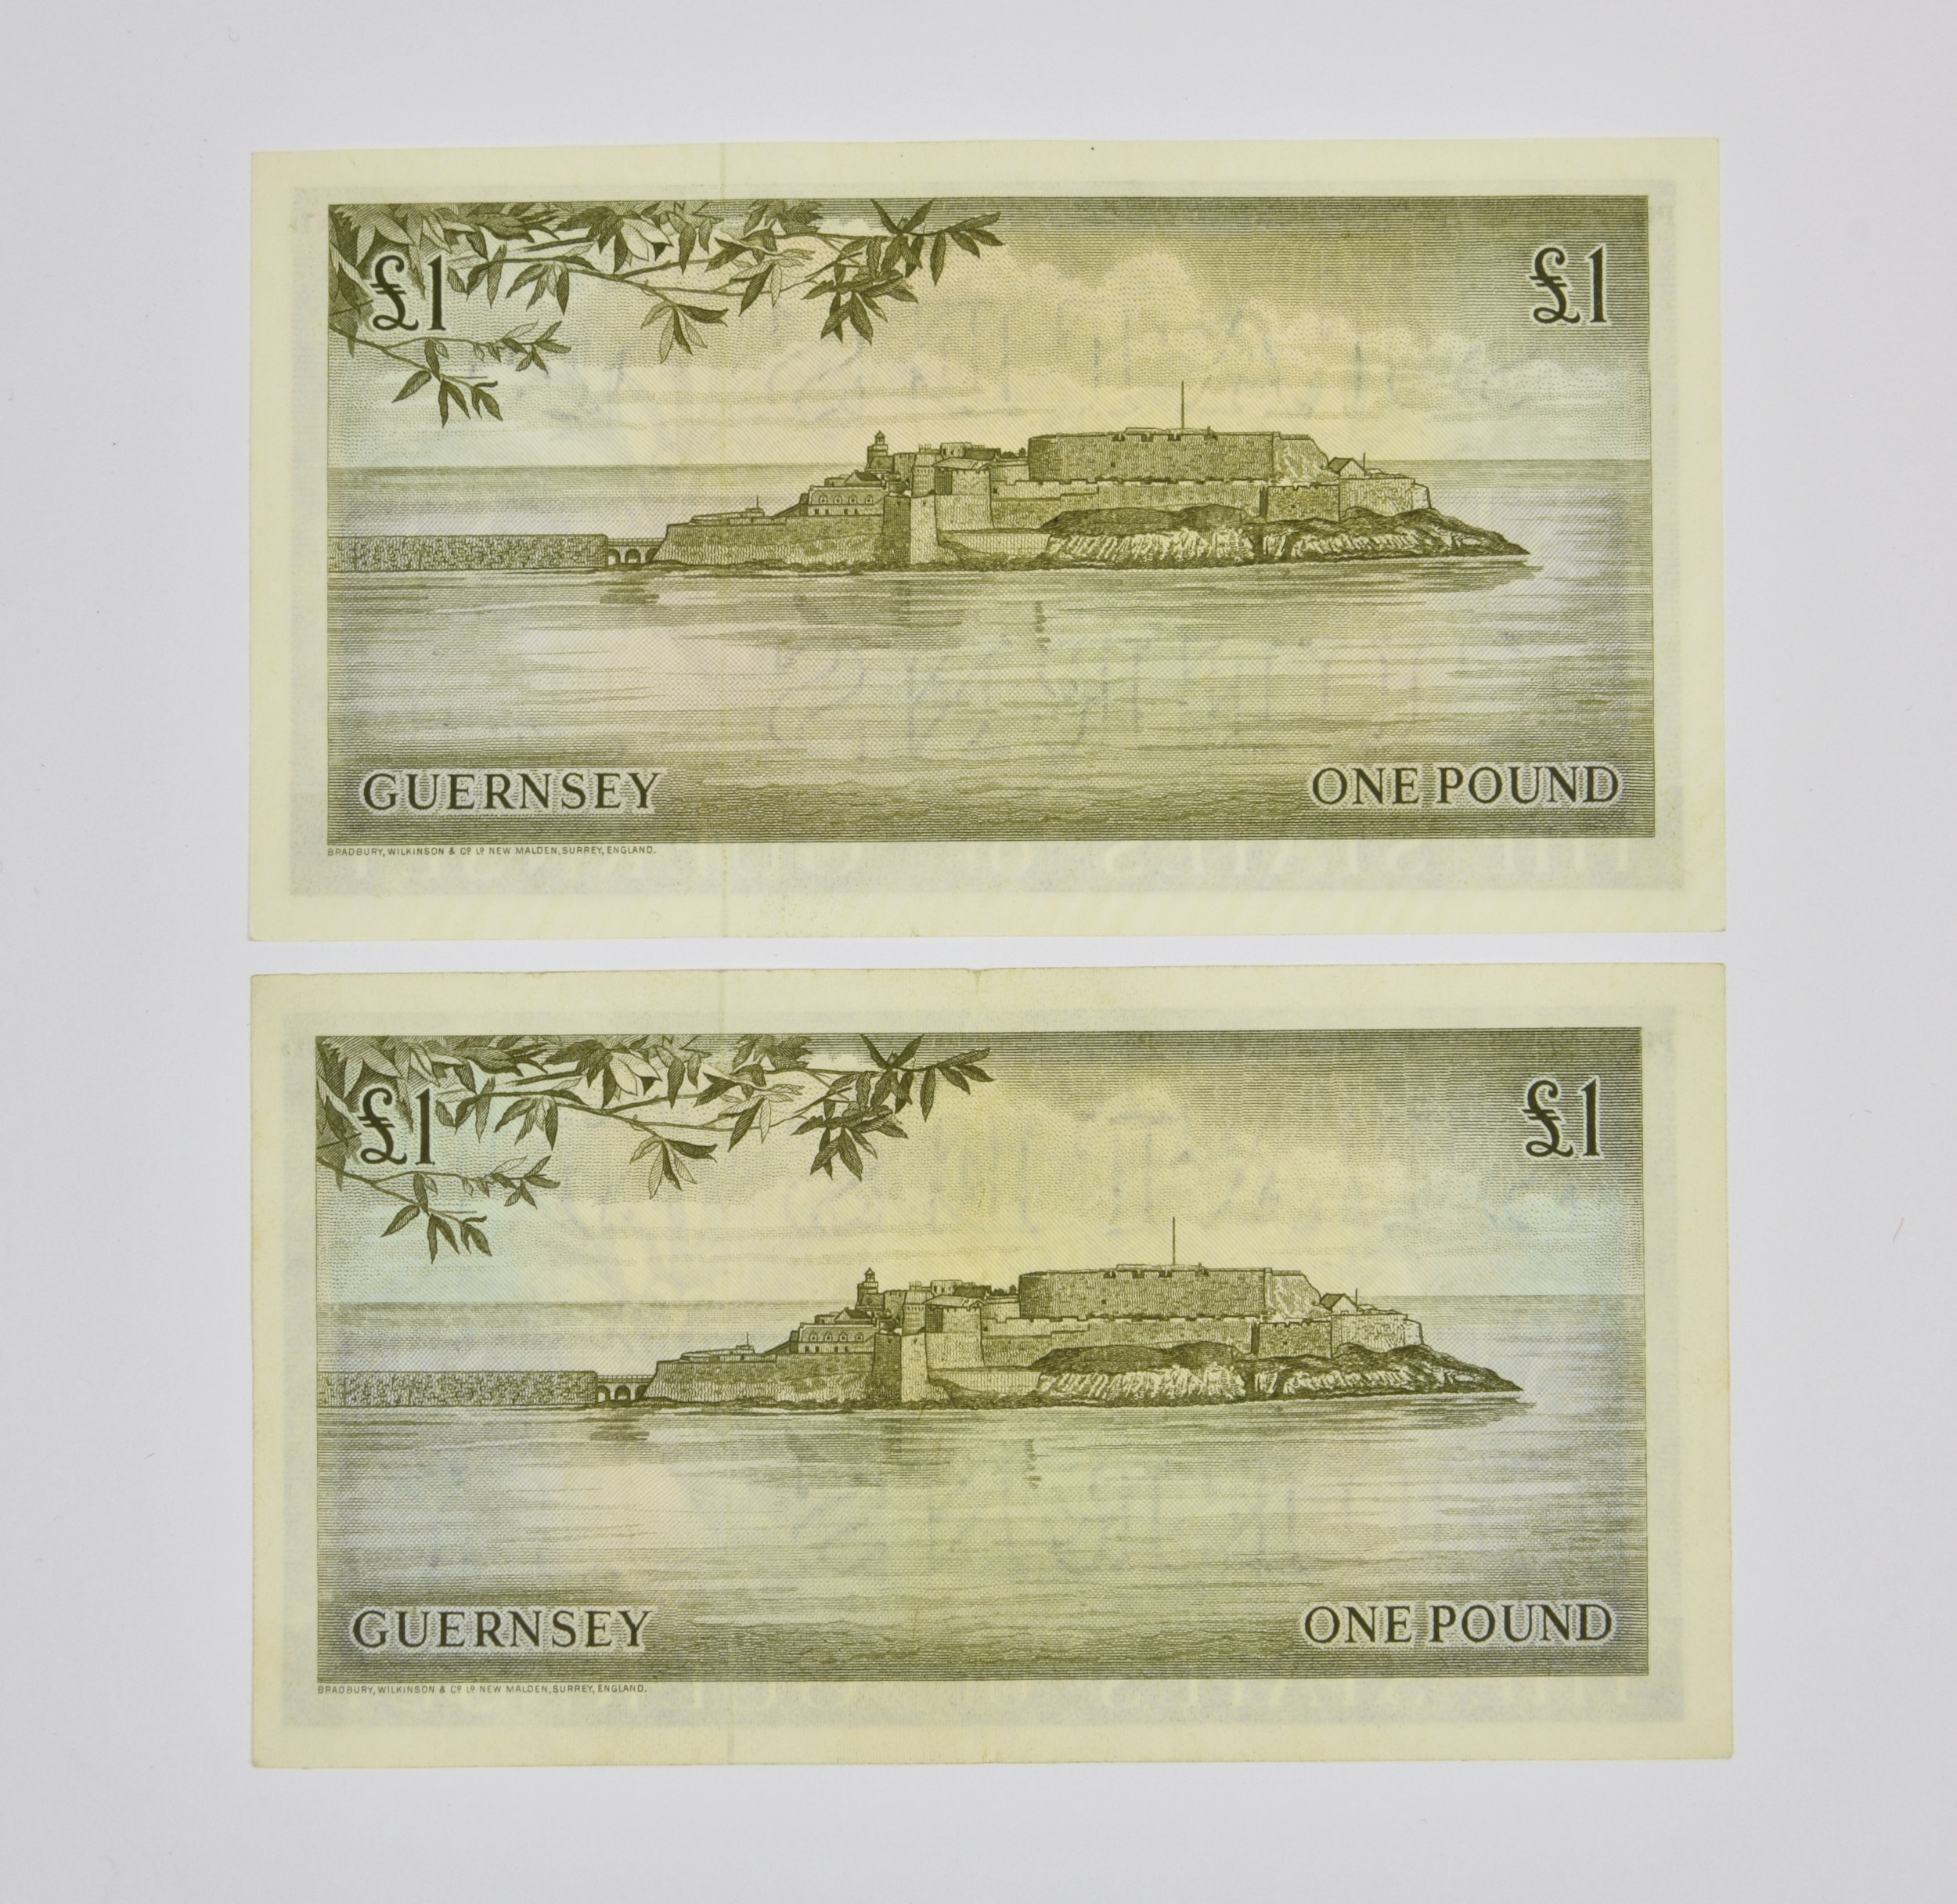 BRITISH BANKNOTES - The States of Guernsey One Pound (2), c.1969, Signatory C. H. Hodder, serial - Image 2 of 2